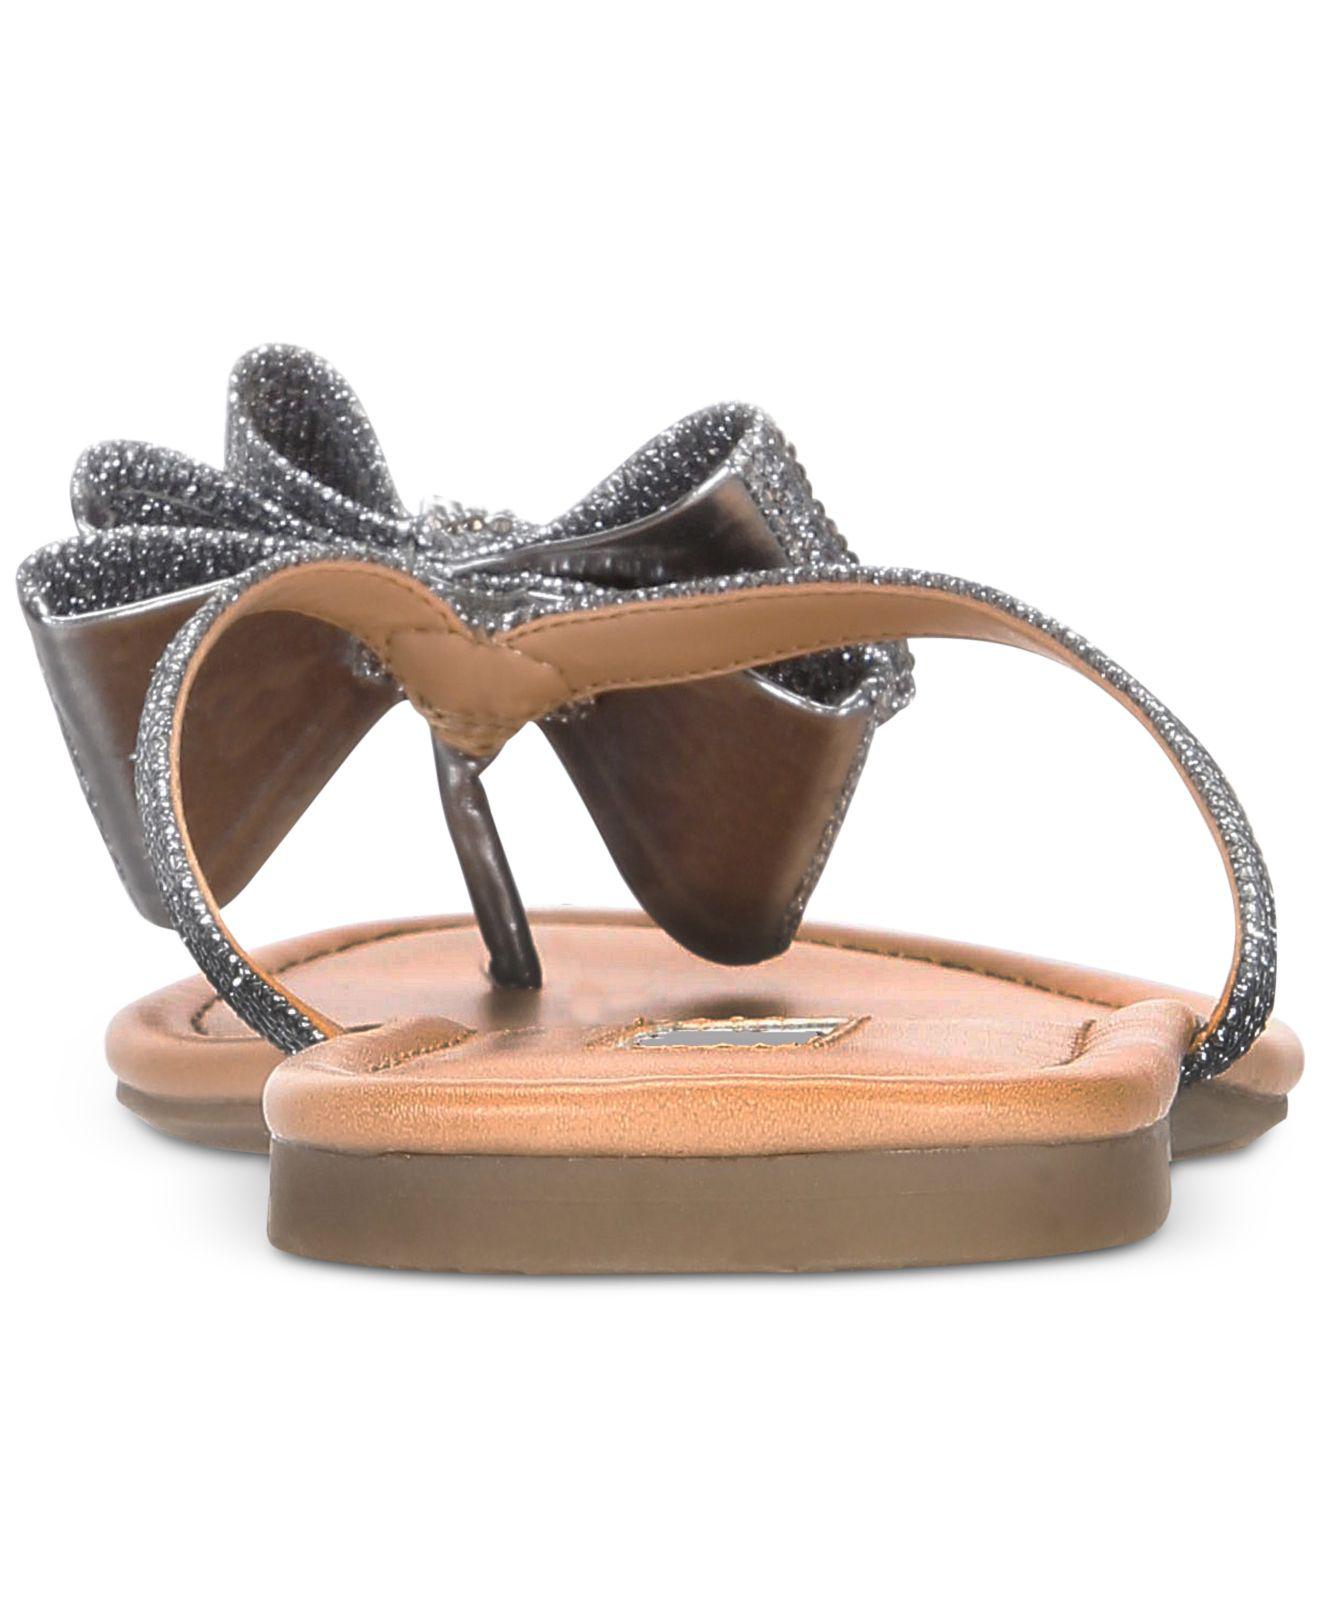 INC International Concepts Women's Mabae Bow Flat Sandals - Lyst